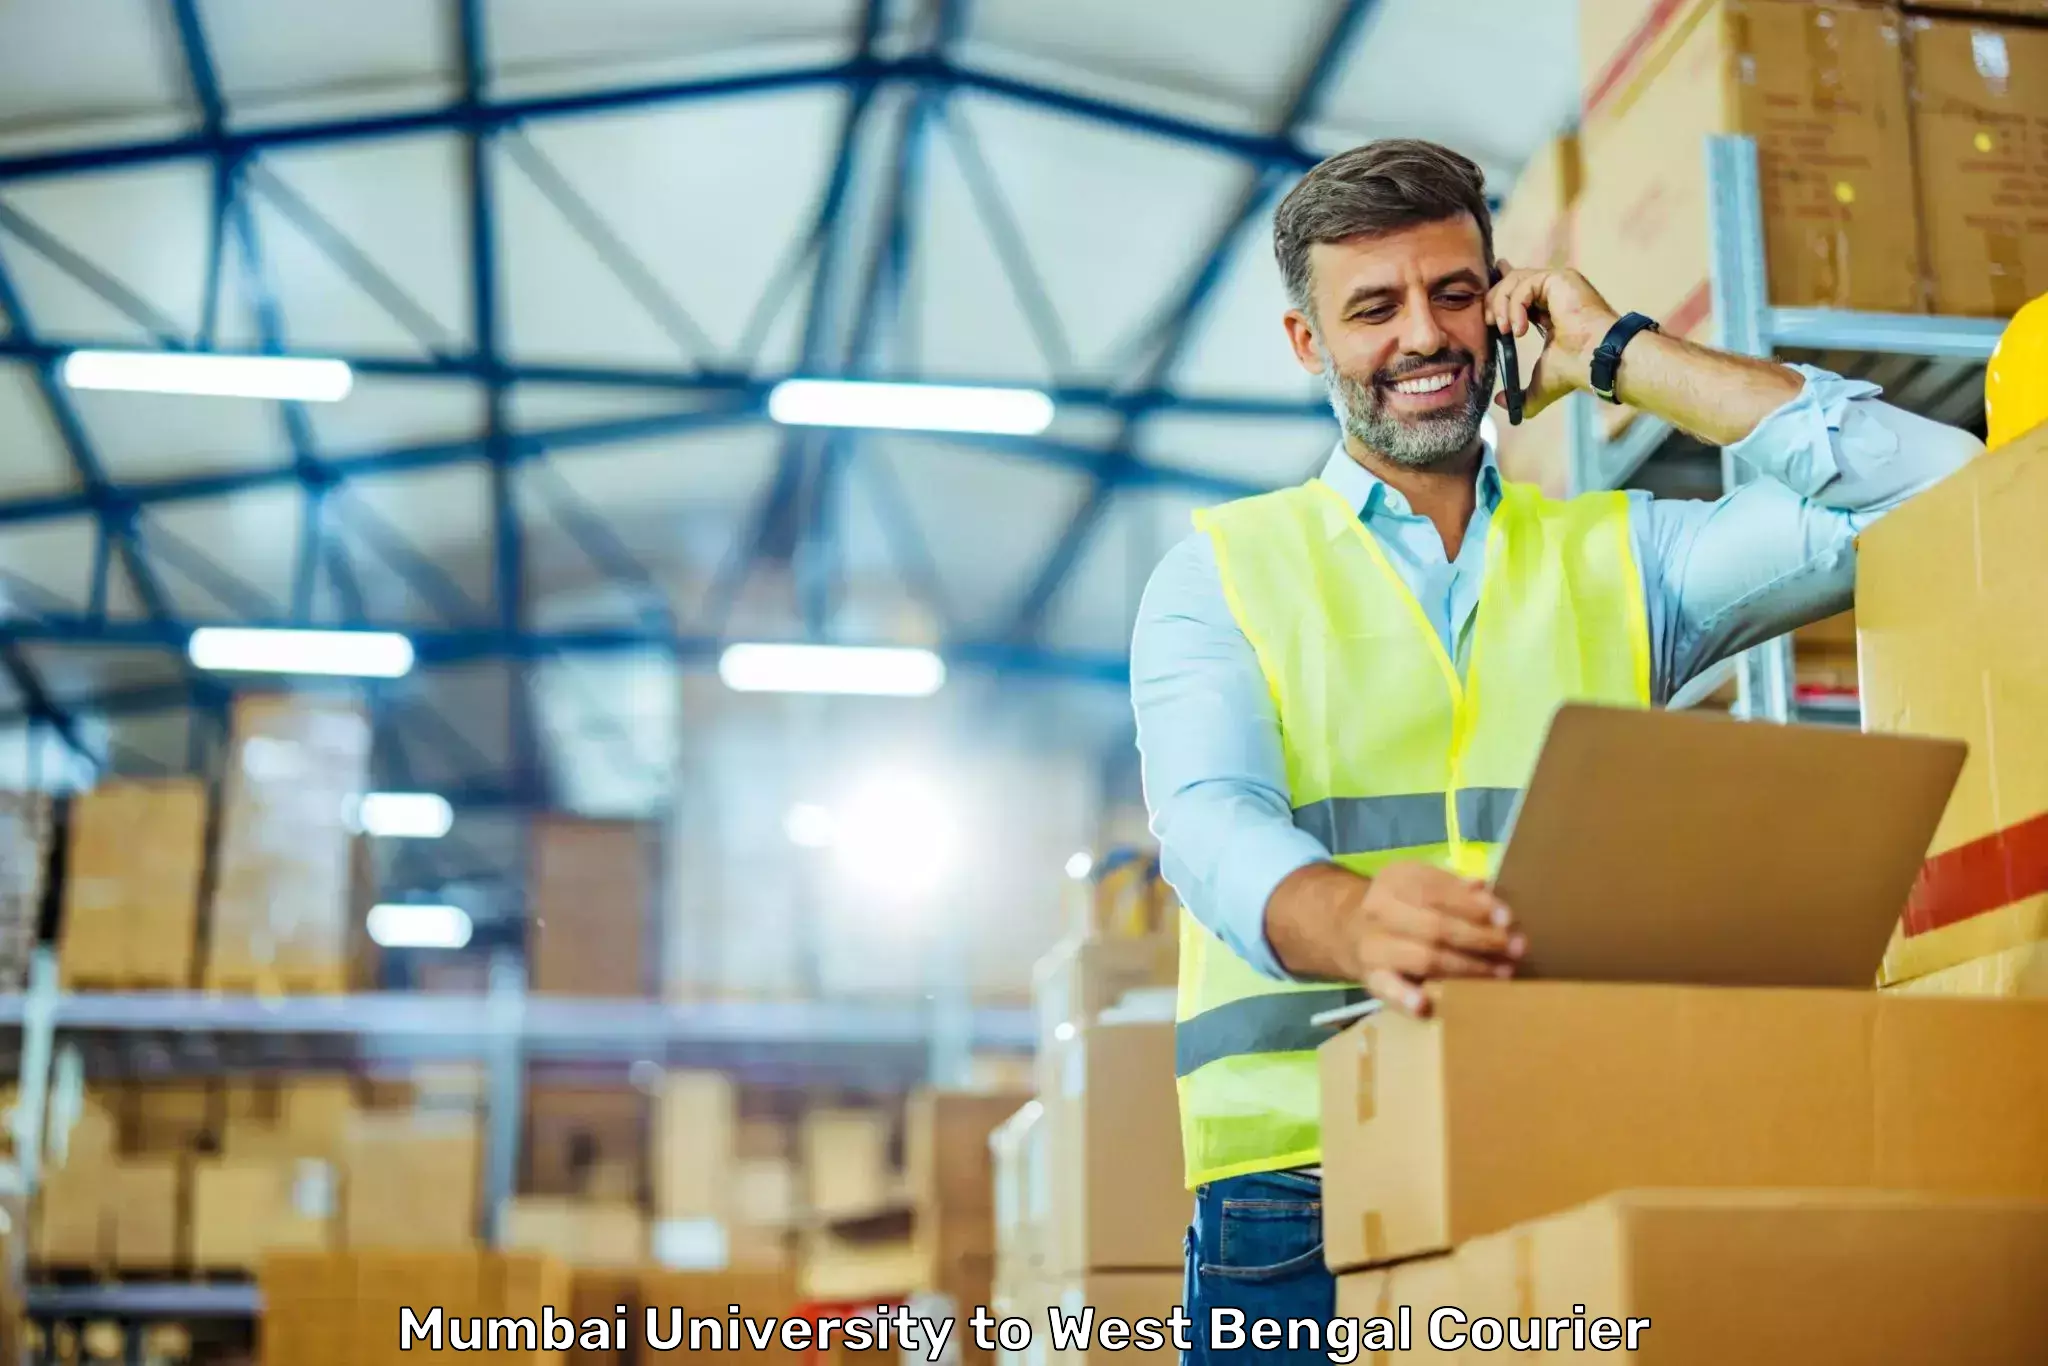 Integrated courier services Mumbai University to West Bengal